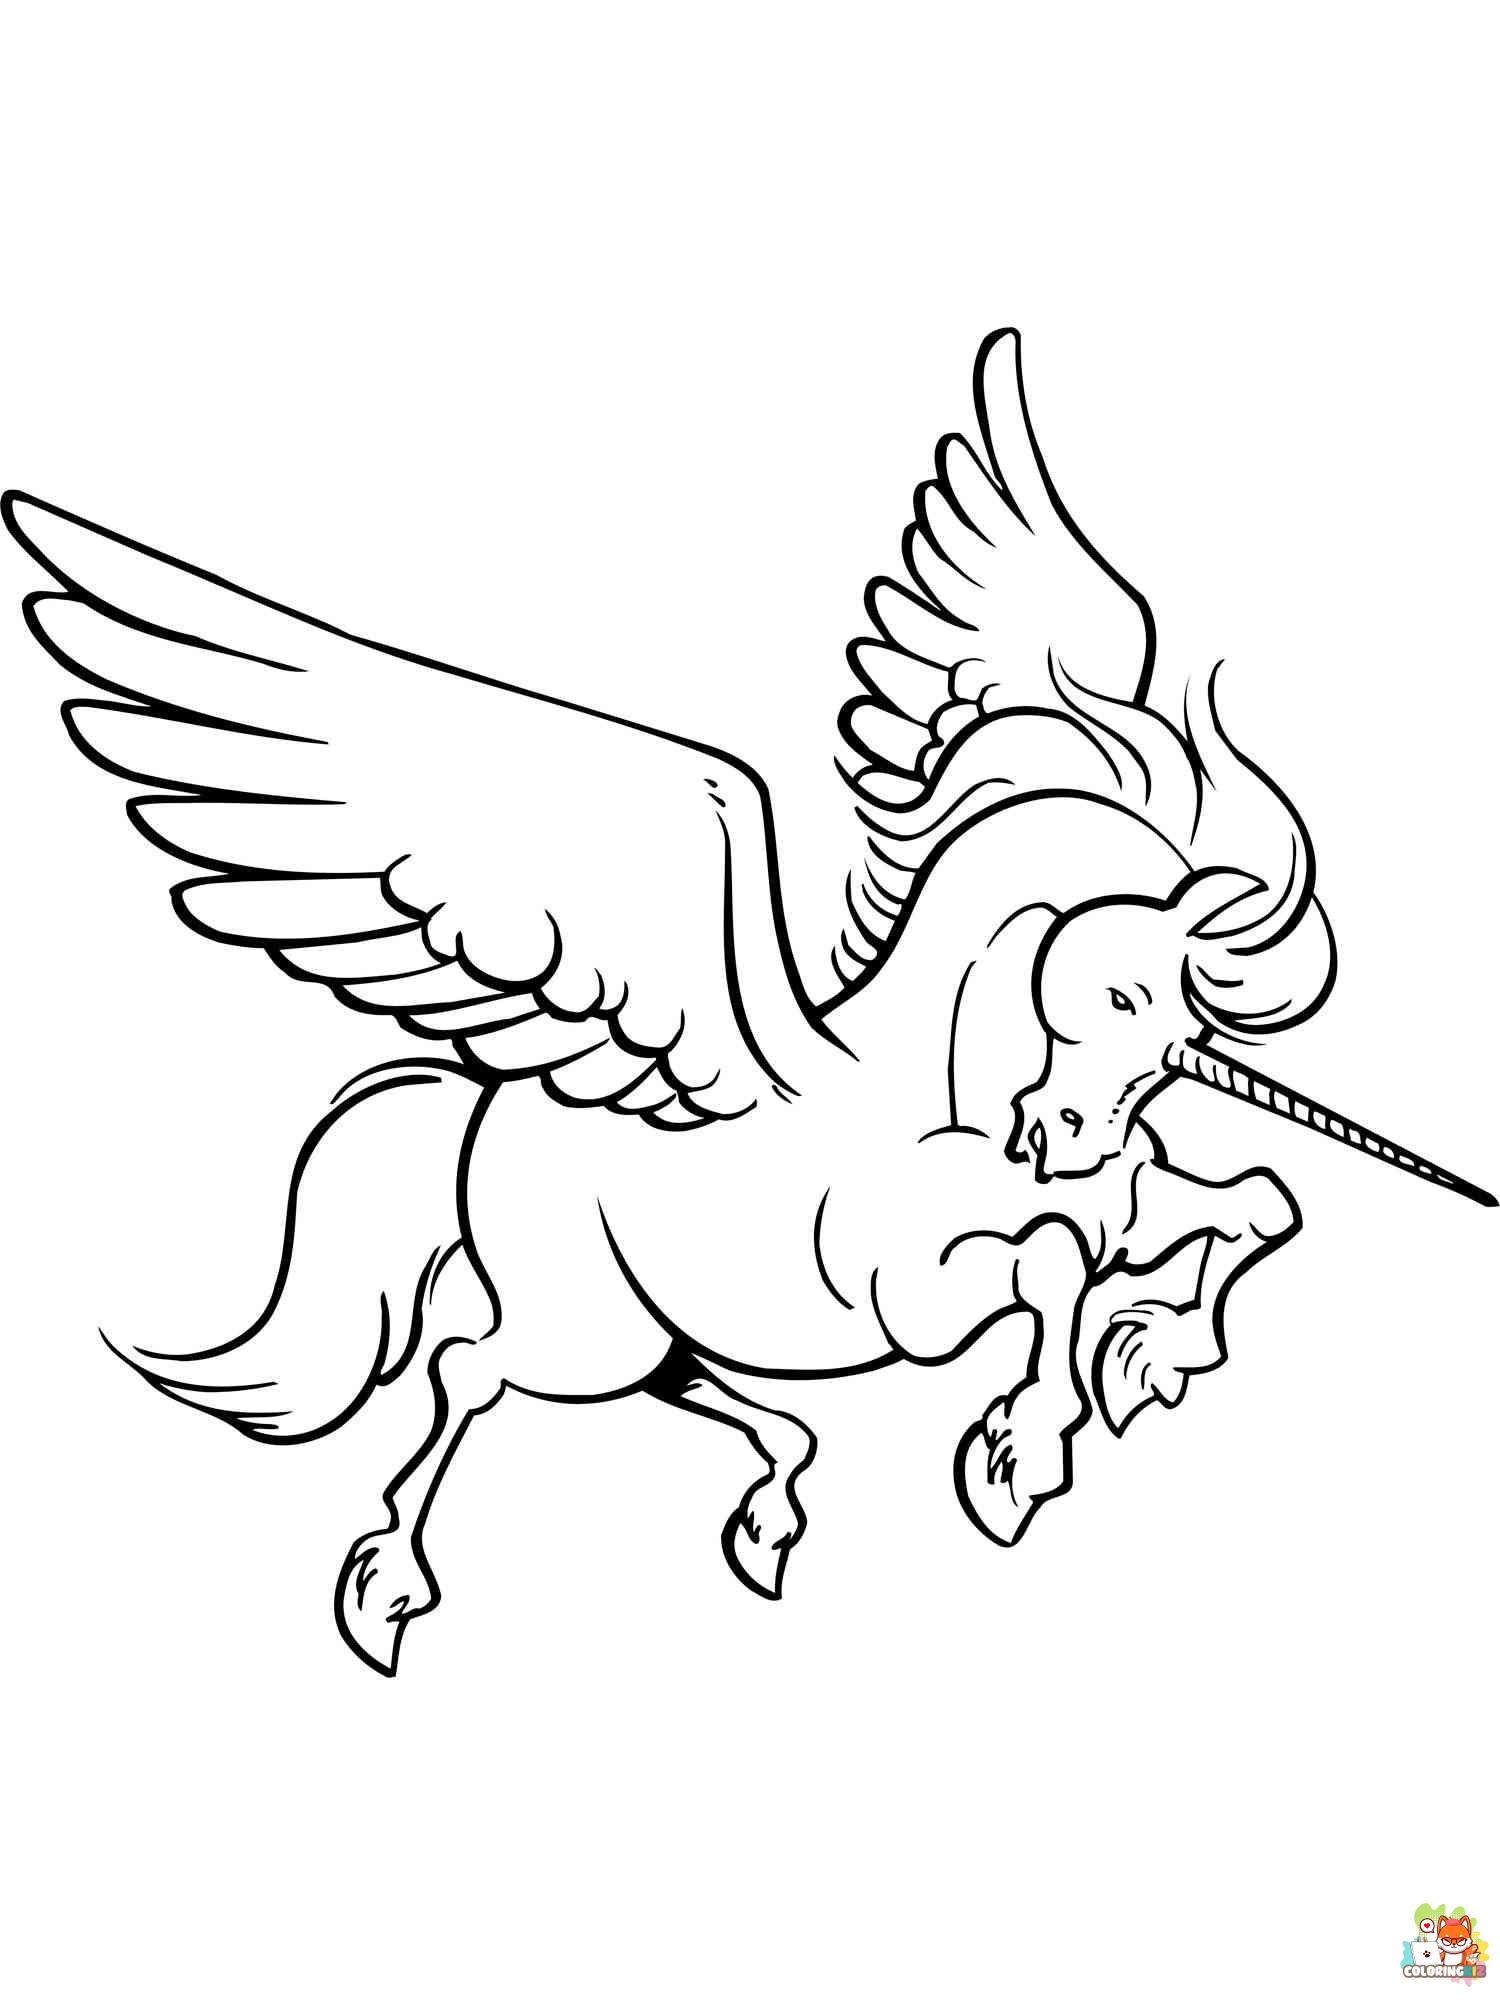 Winged Unicorn Coloring Pages 13